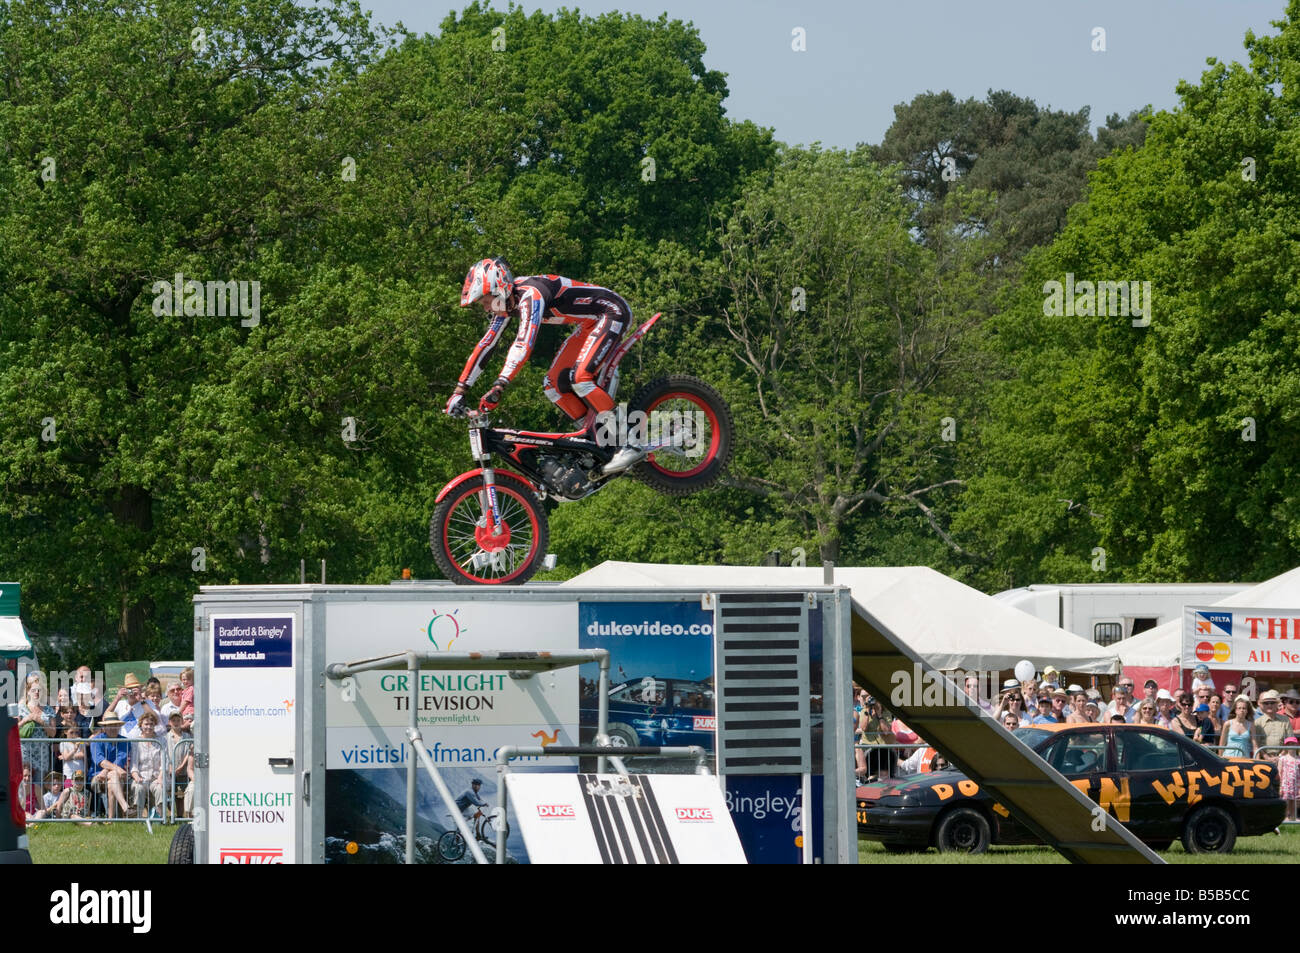 Motorcycle Stunt Rider riding his Motorcycle Stopping On His Front Wheel on the Roof of a Trailer doing stunts at village fete Betchworth Surrey uk Stock Photo